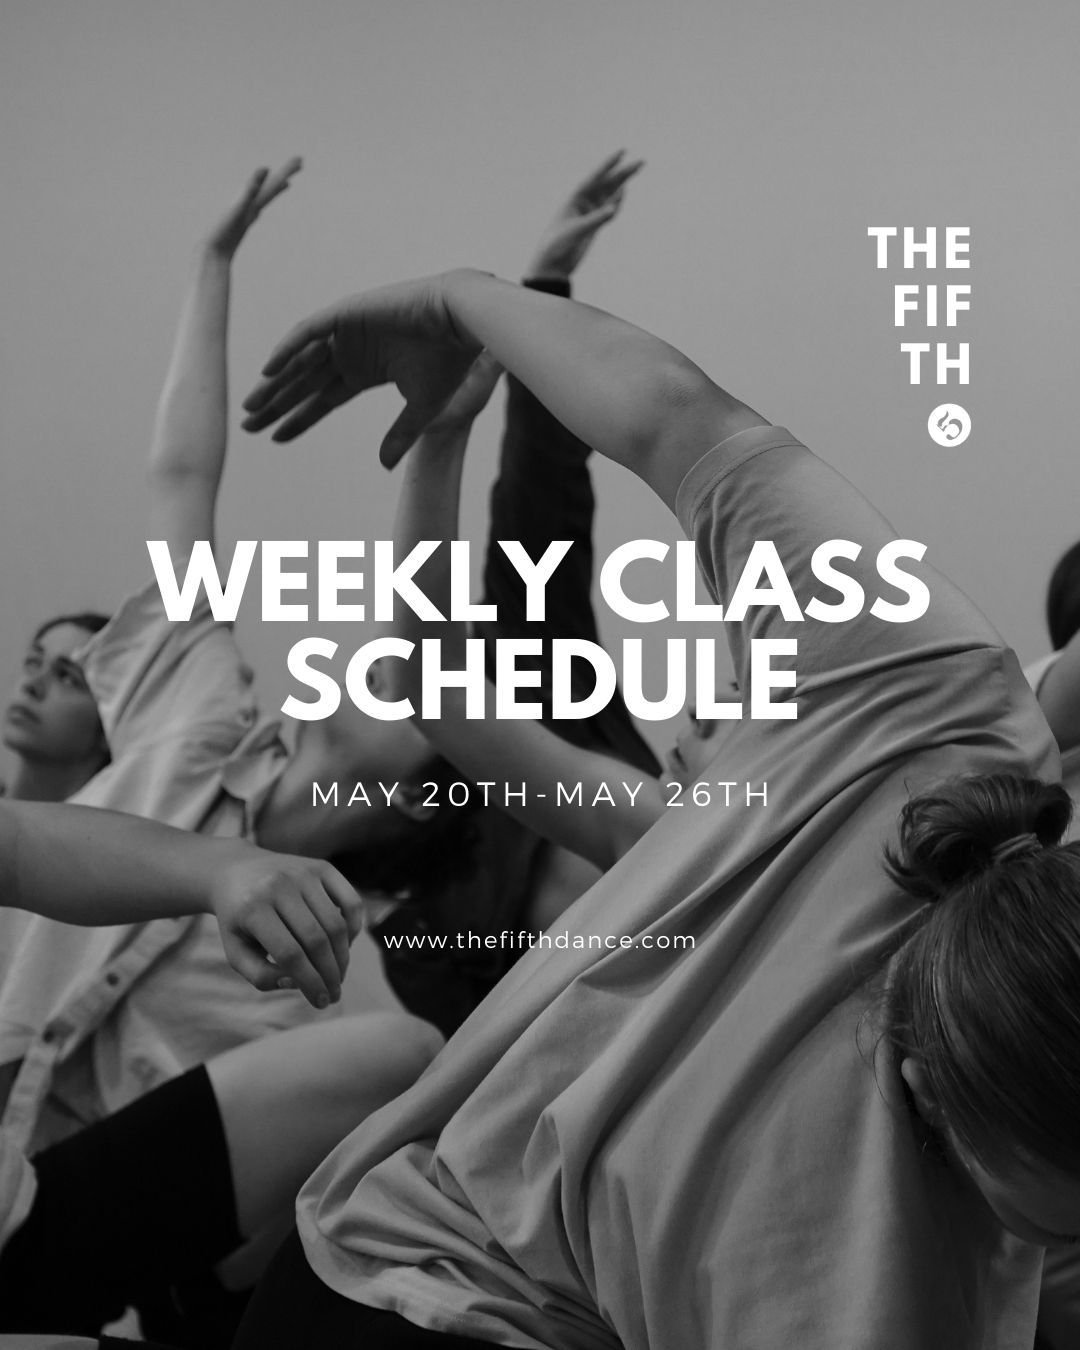 Weekly Schedule 🐠🐠

ᴍᴏɴᴅᴀʏ⁠ 
10:30PM - Int/Adv Contemp with Darryl @dc_tracy
12:15PM - Int/Adv Ballet with Eric (sub for J&auml;rvi)
4:00PM - Beg Ballet with Bri⁠ @brianna_clarkee
5:15PM - Beg Pointe with Bri⁠ @brianna_clarkee

ᴛᴜᴇꜱᴅᴀʏ⁠ 
10:30AM - 